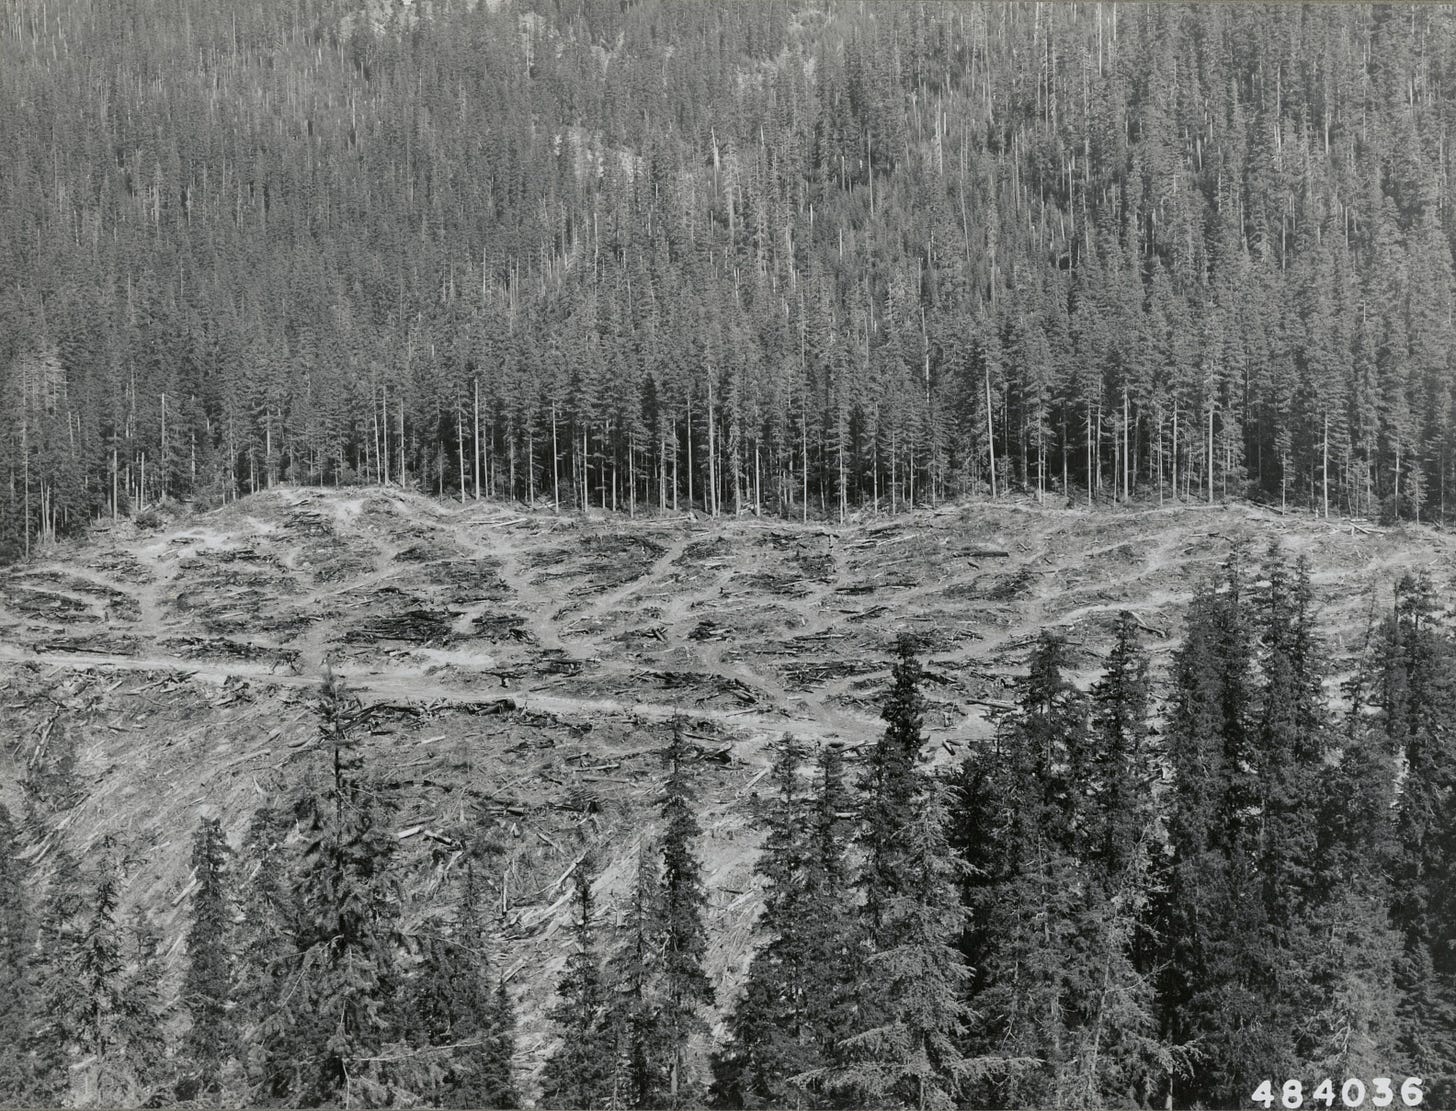 black and white photo of clearcut with skid trails